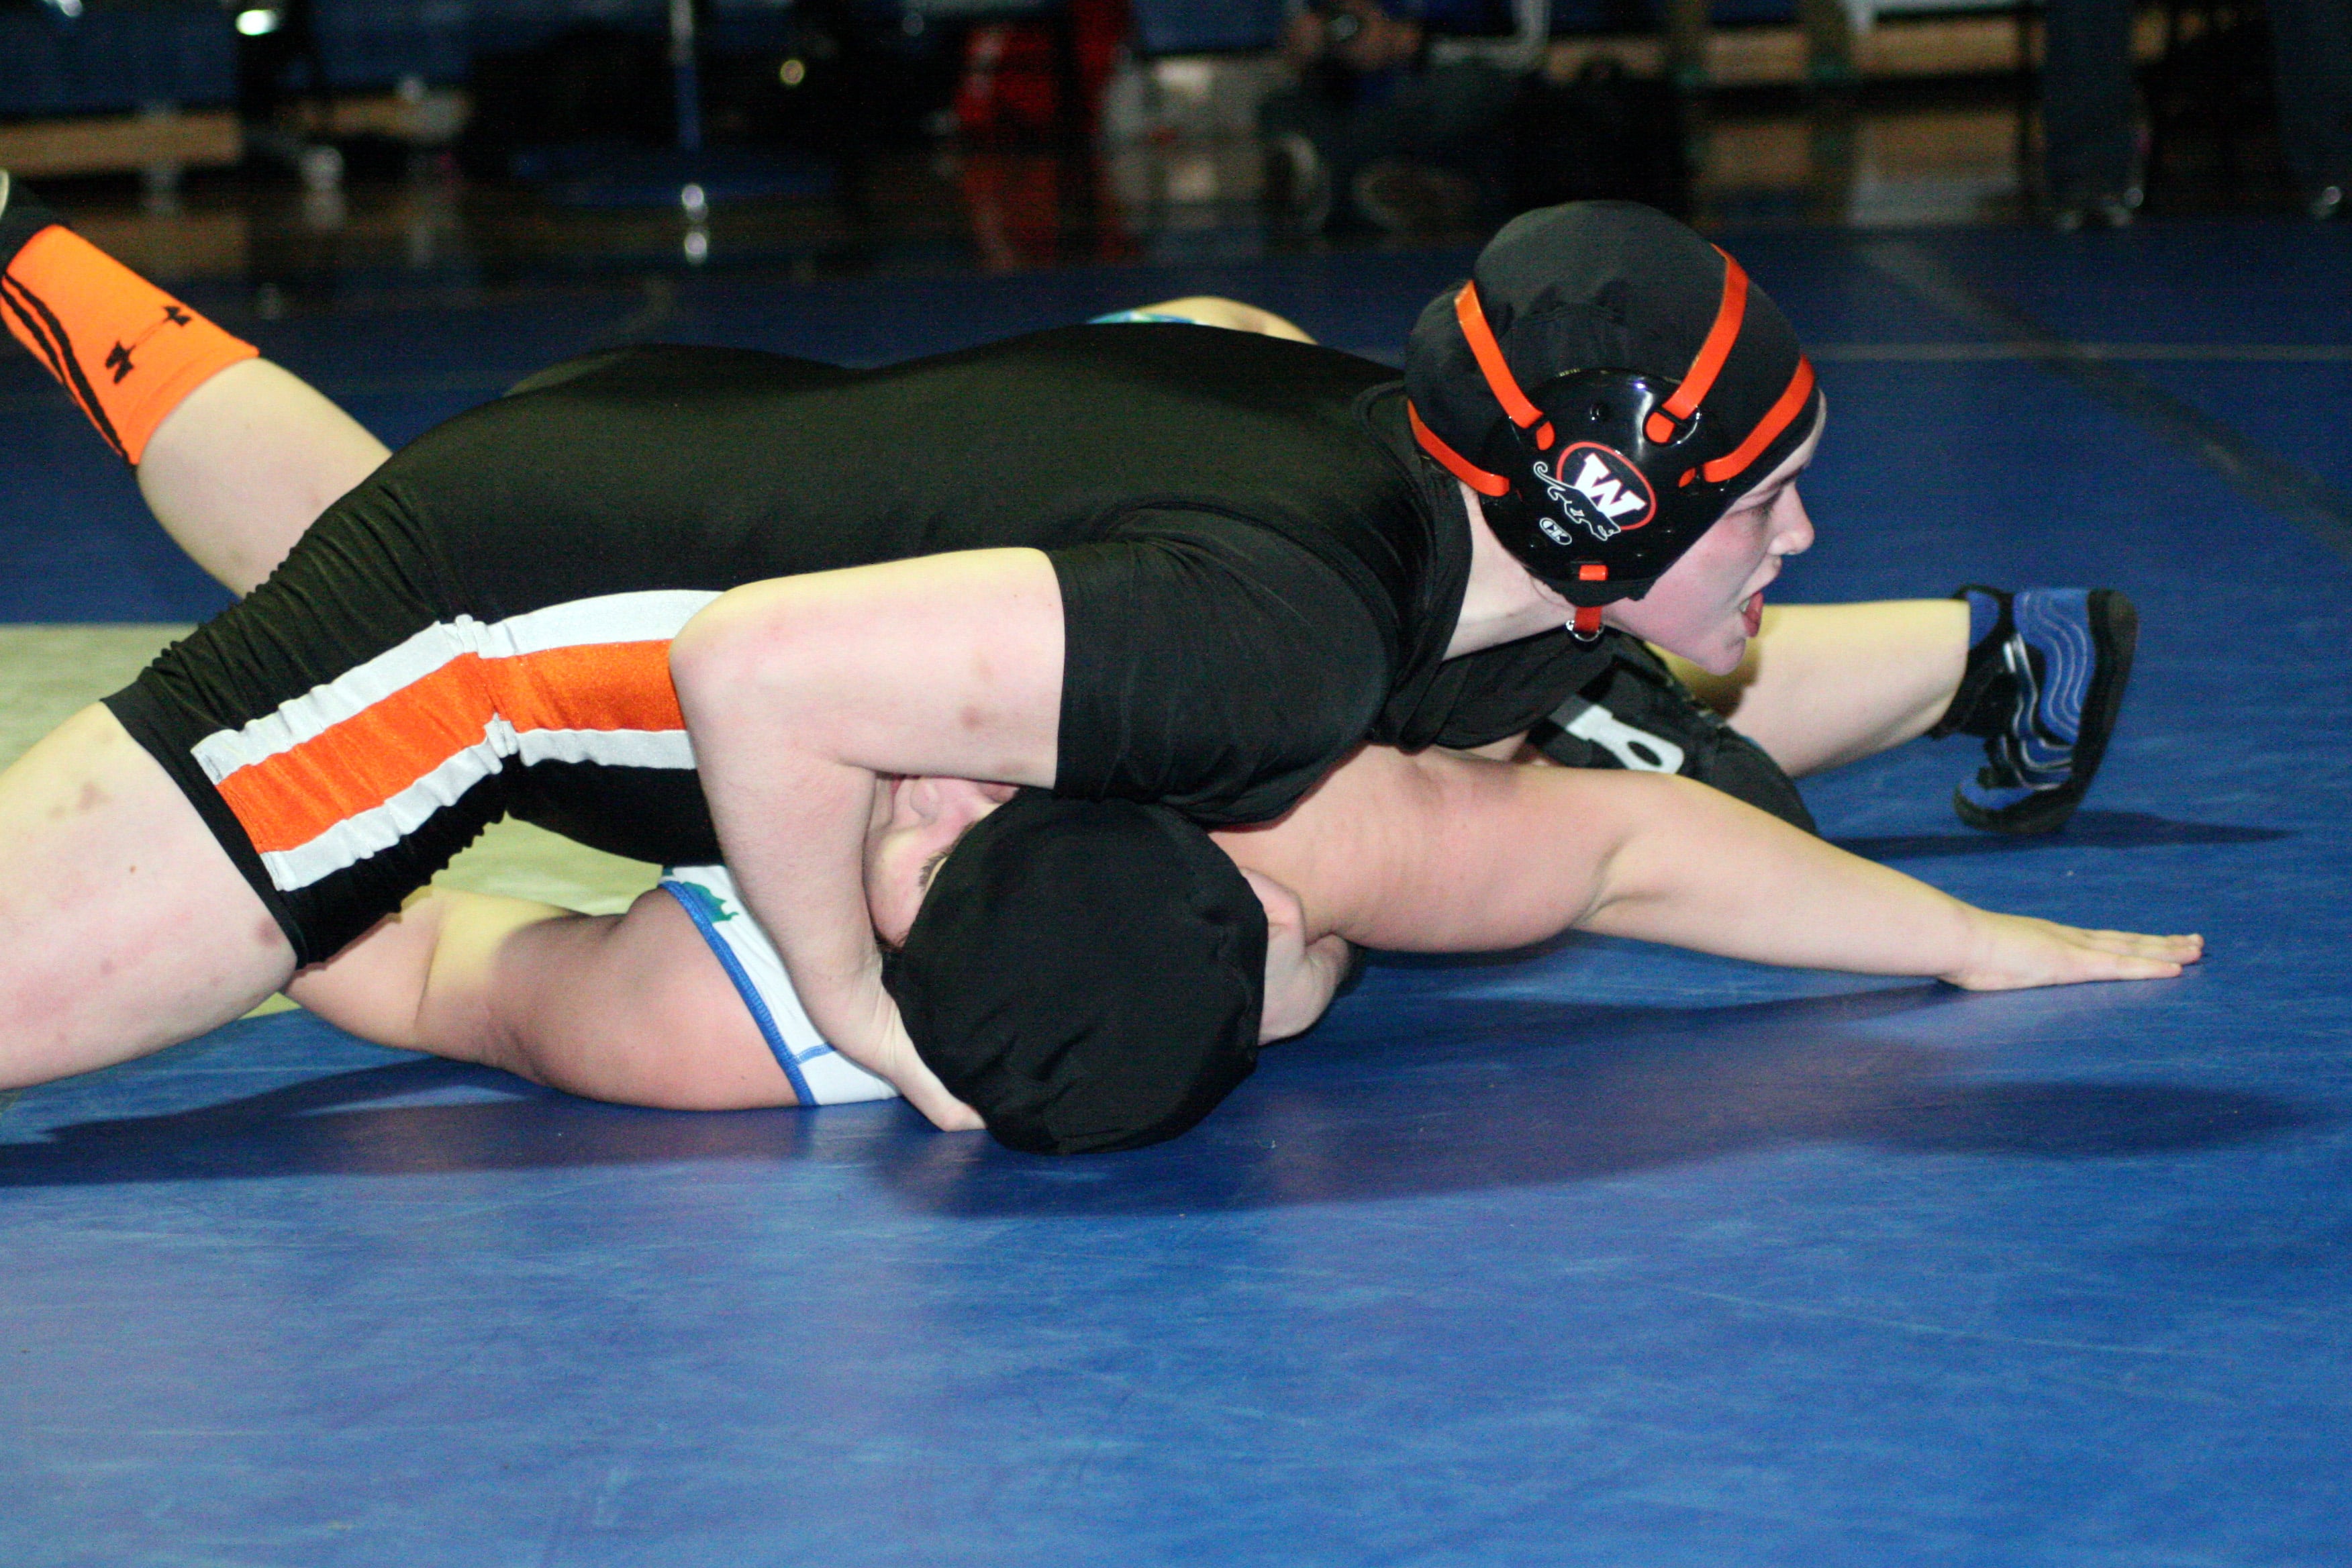 Katelyn Purkeypyle pinned her opponent to become the 190-pound champion for Washougal.